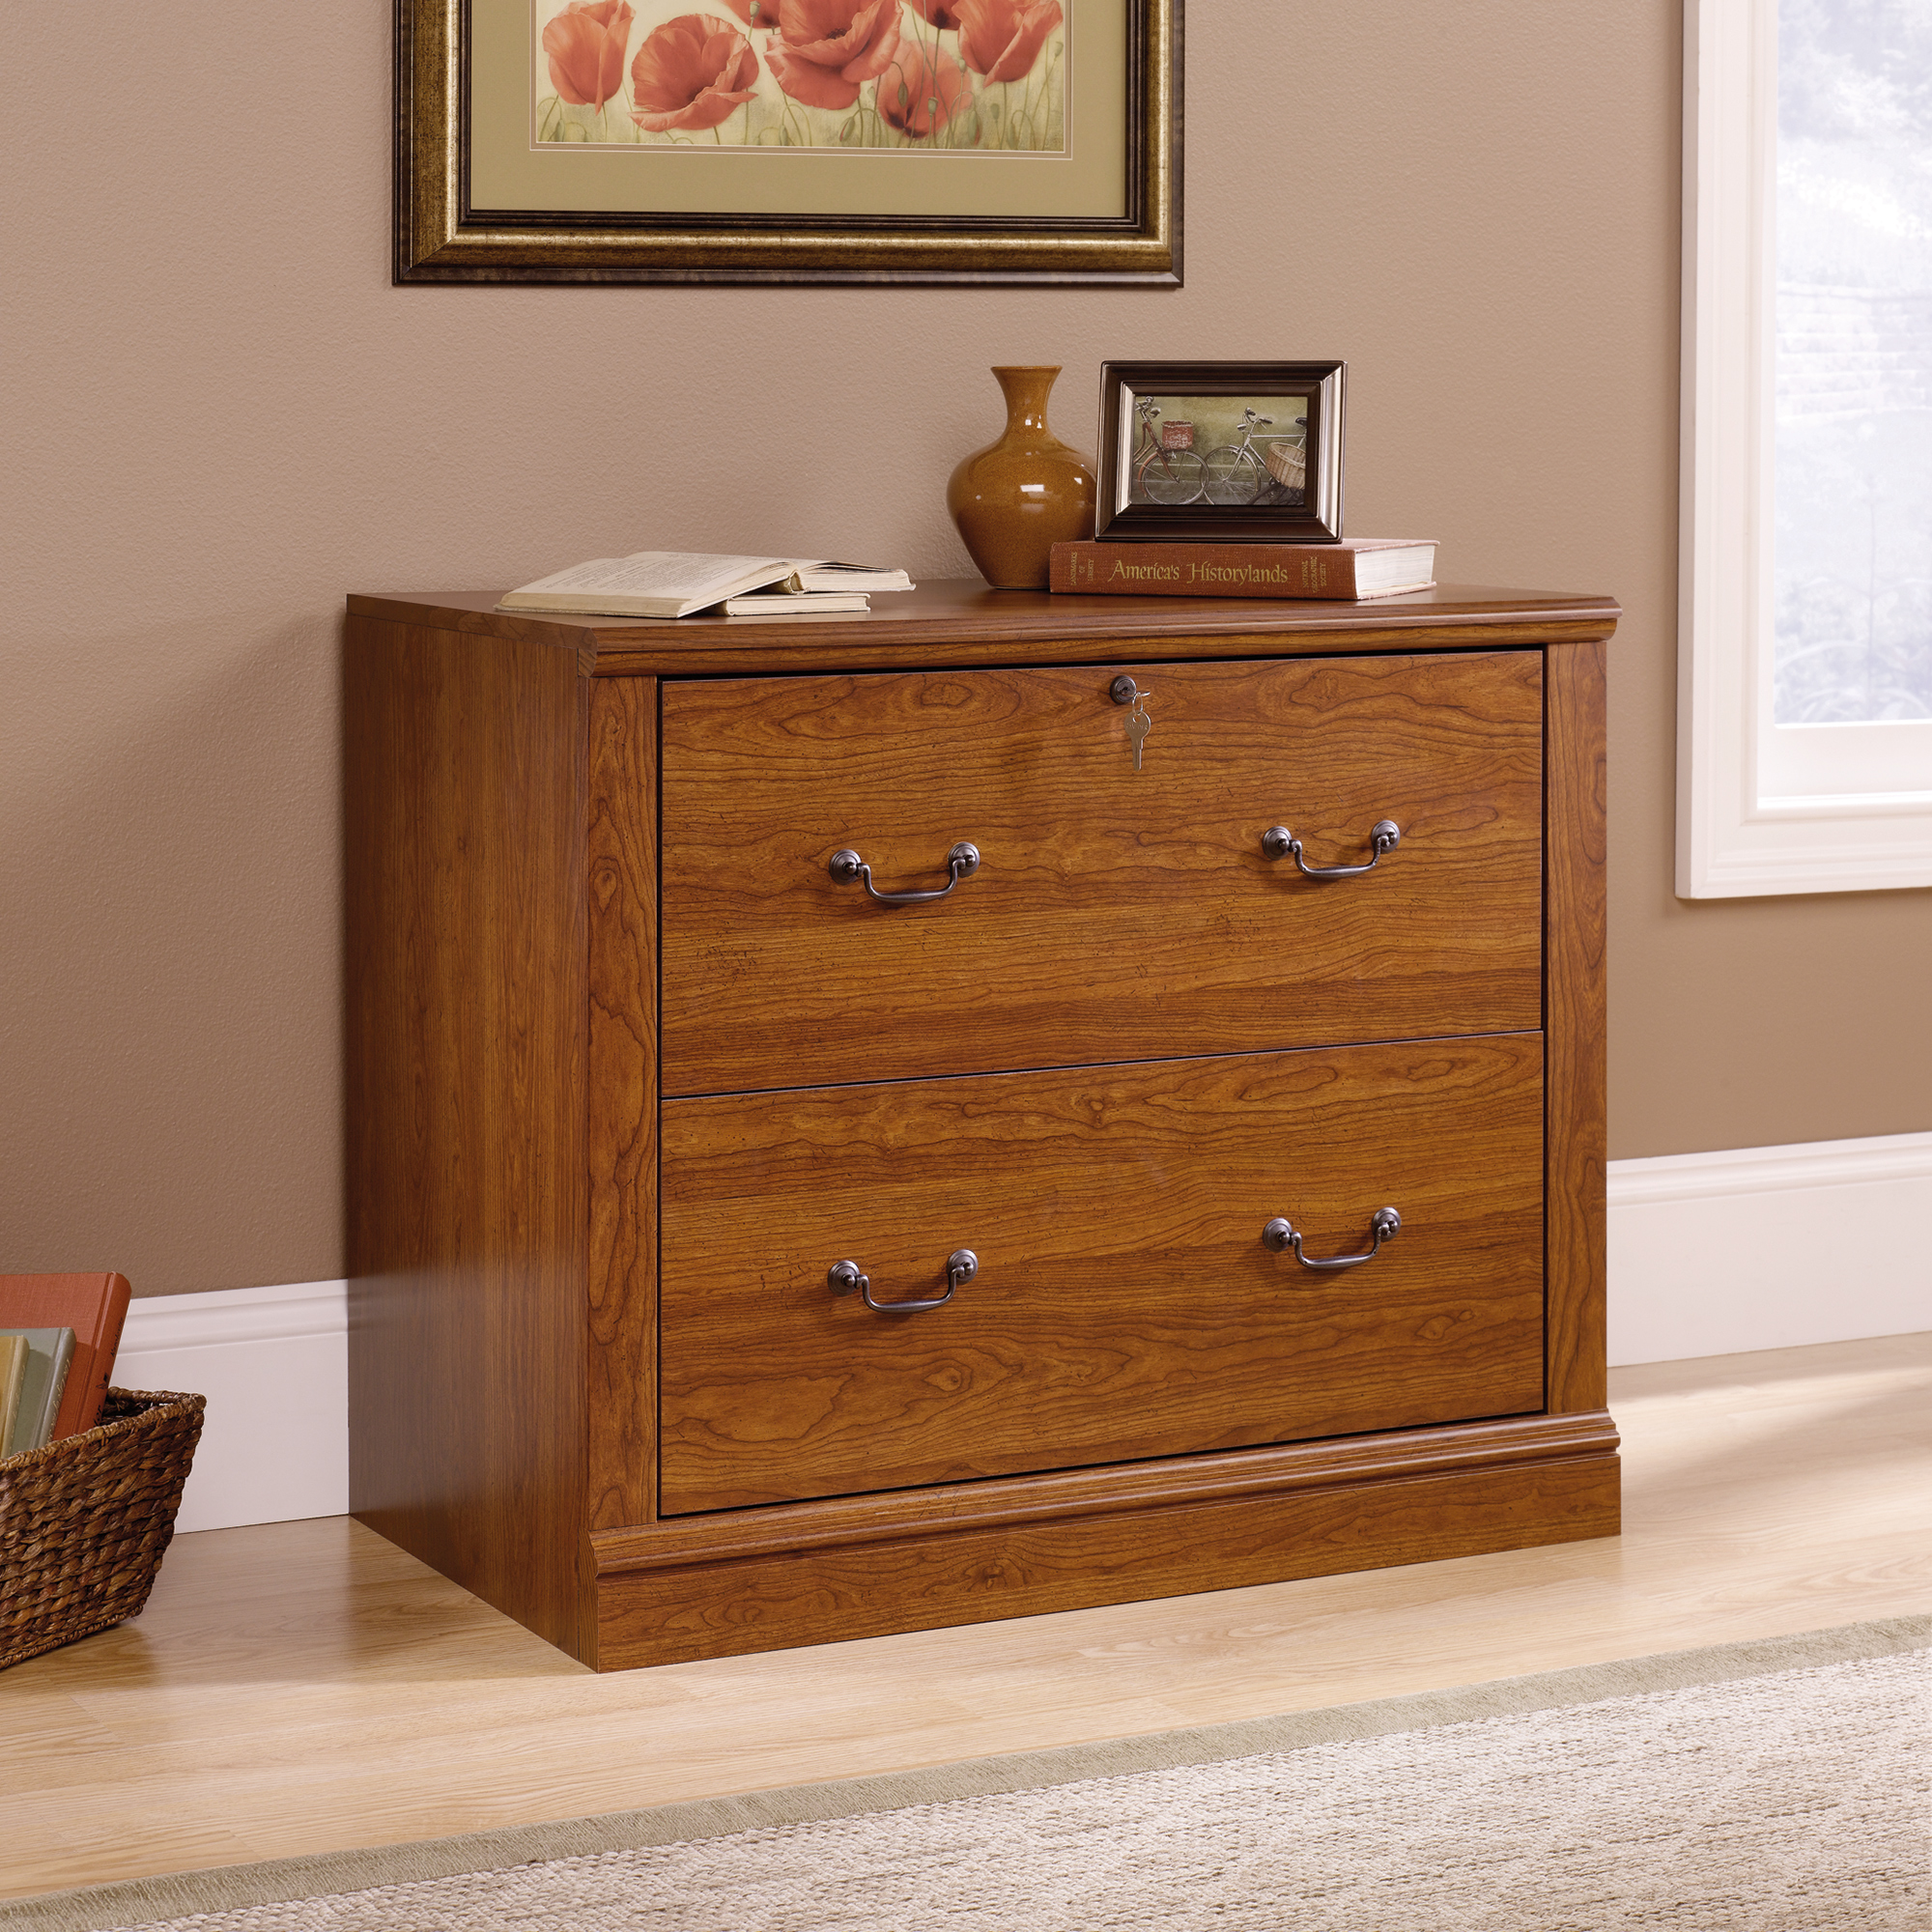 Sauder 101702 Camden County Lateral File The Furniture Co